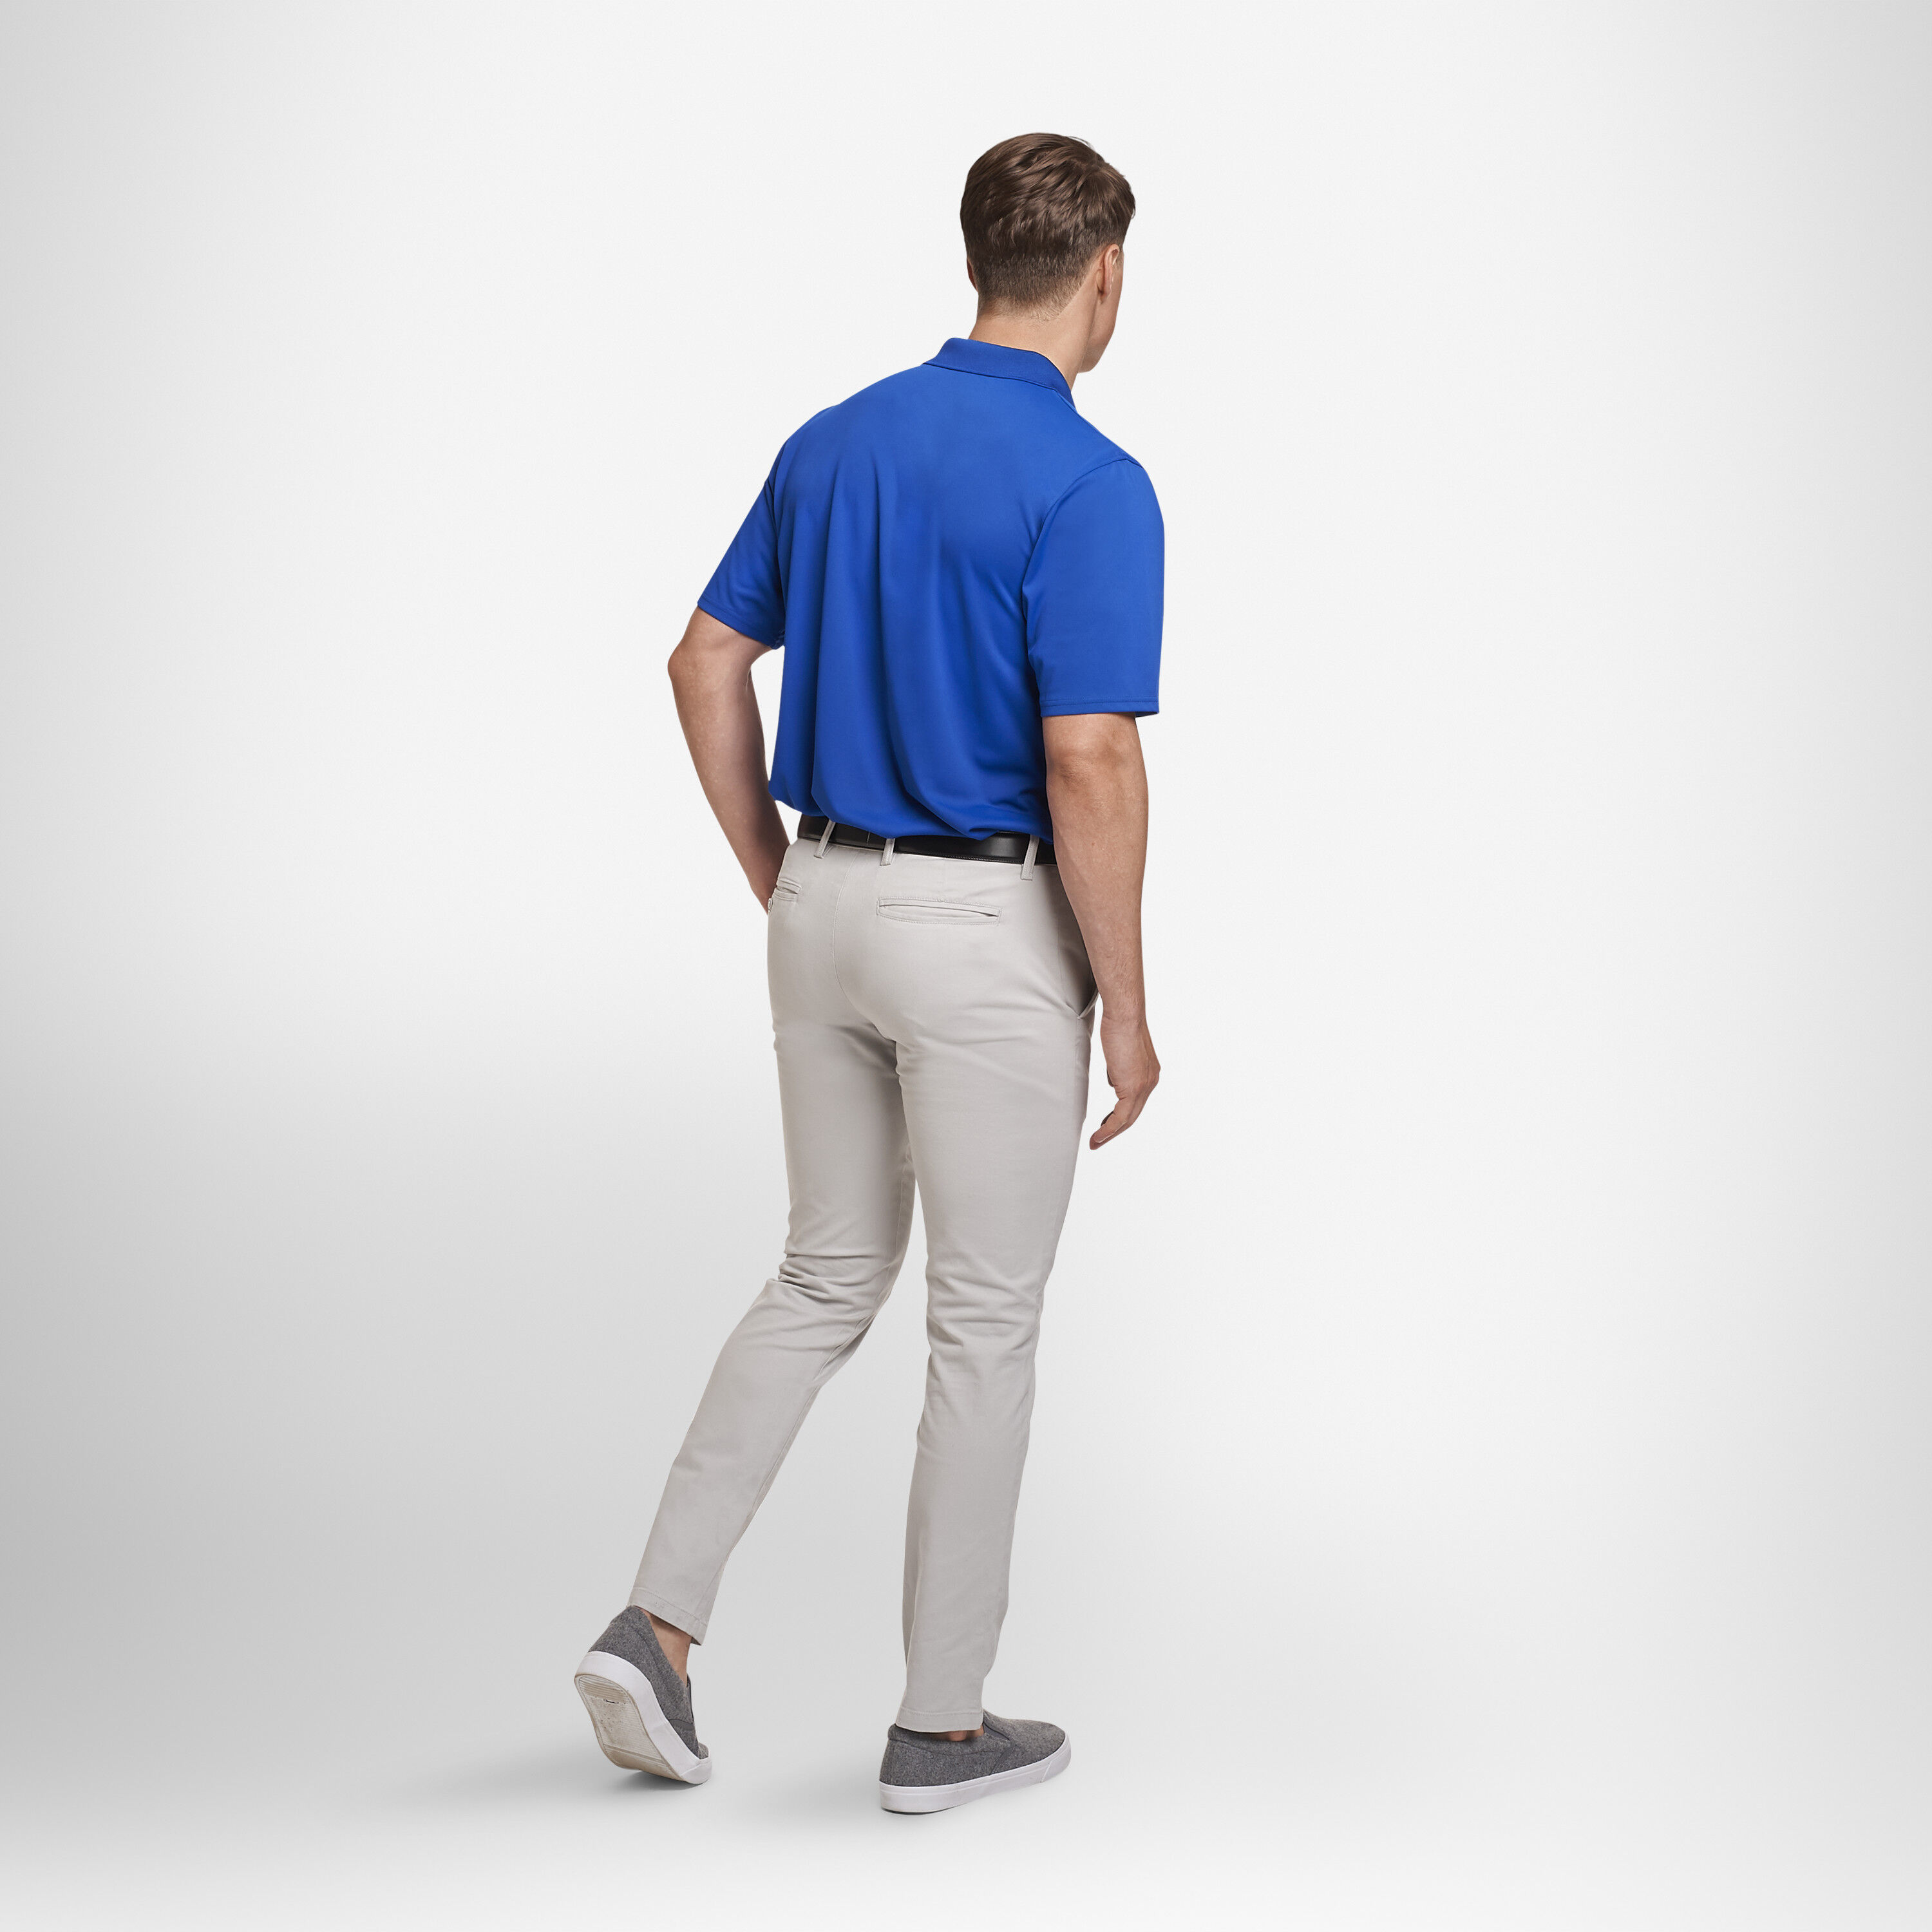 russell performance polo